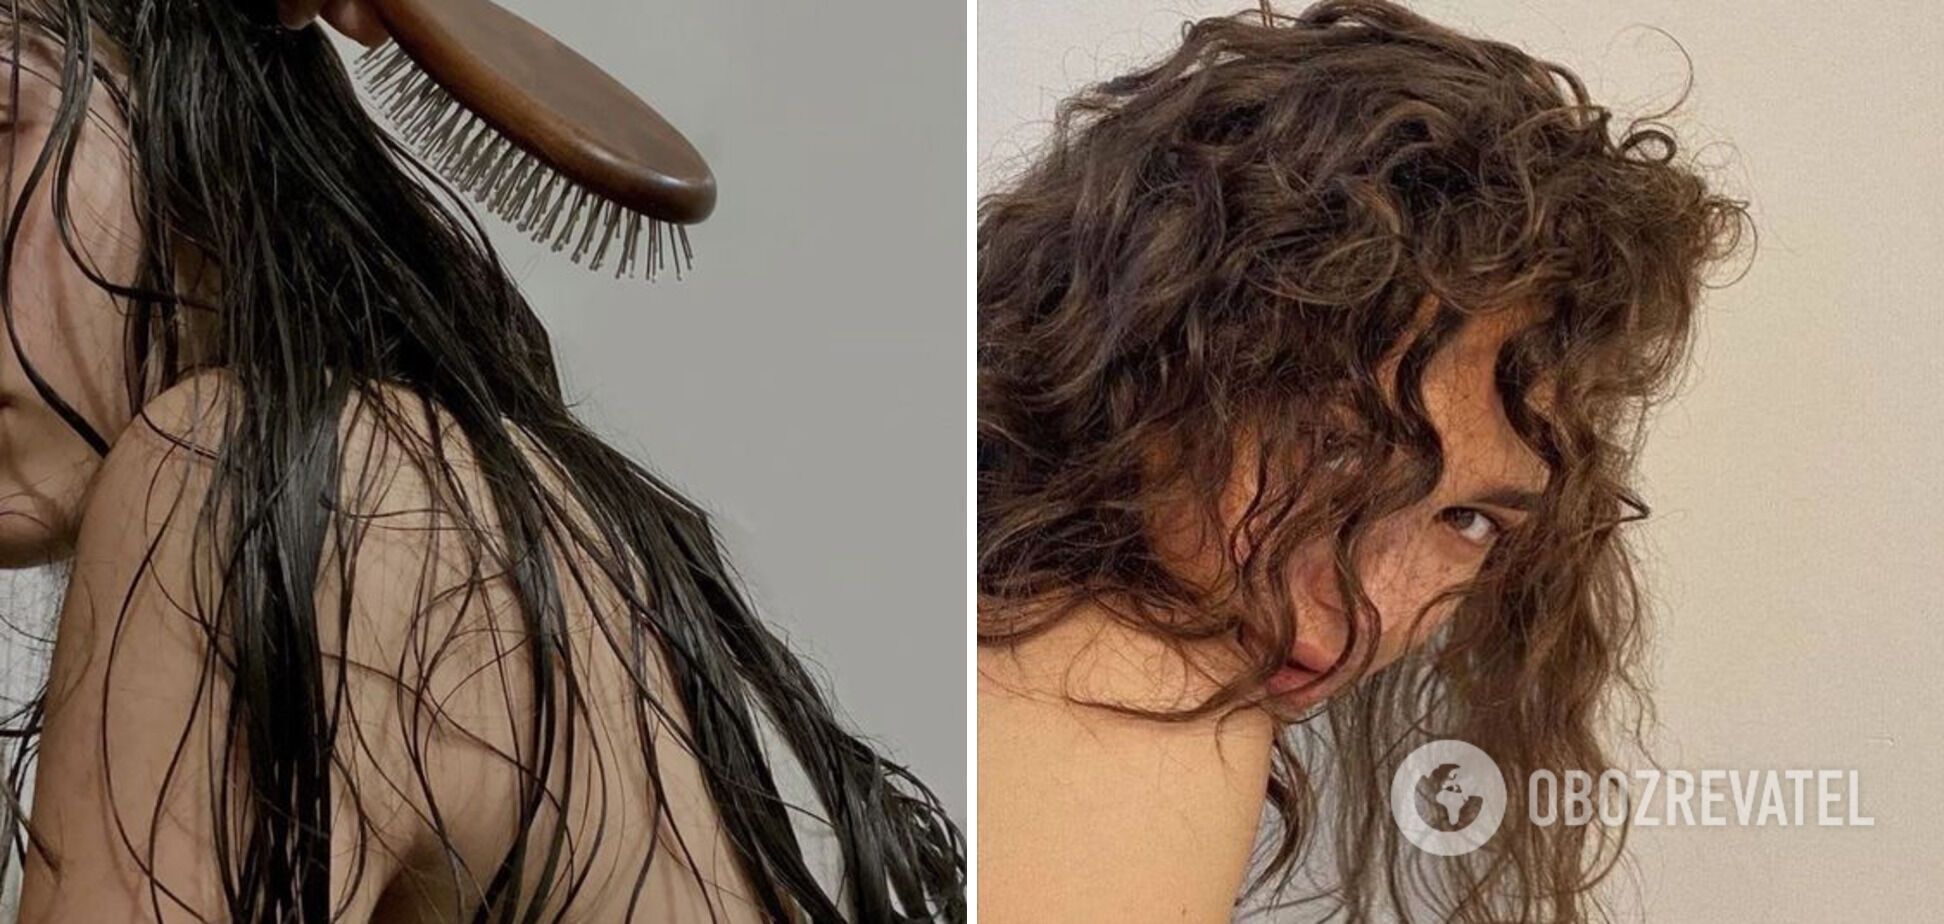 5 secrets for straighting hair to make you look like you've just visited a beauty salon